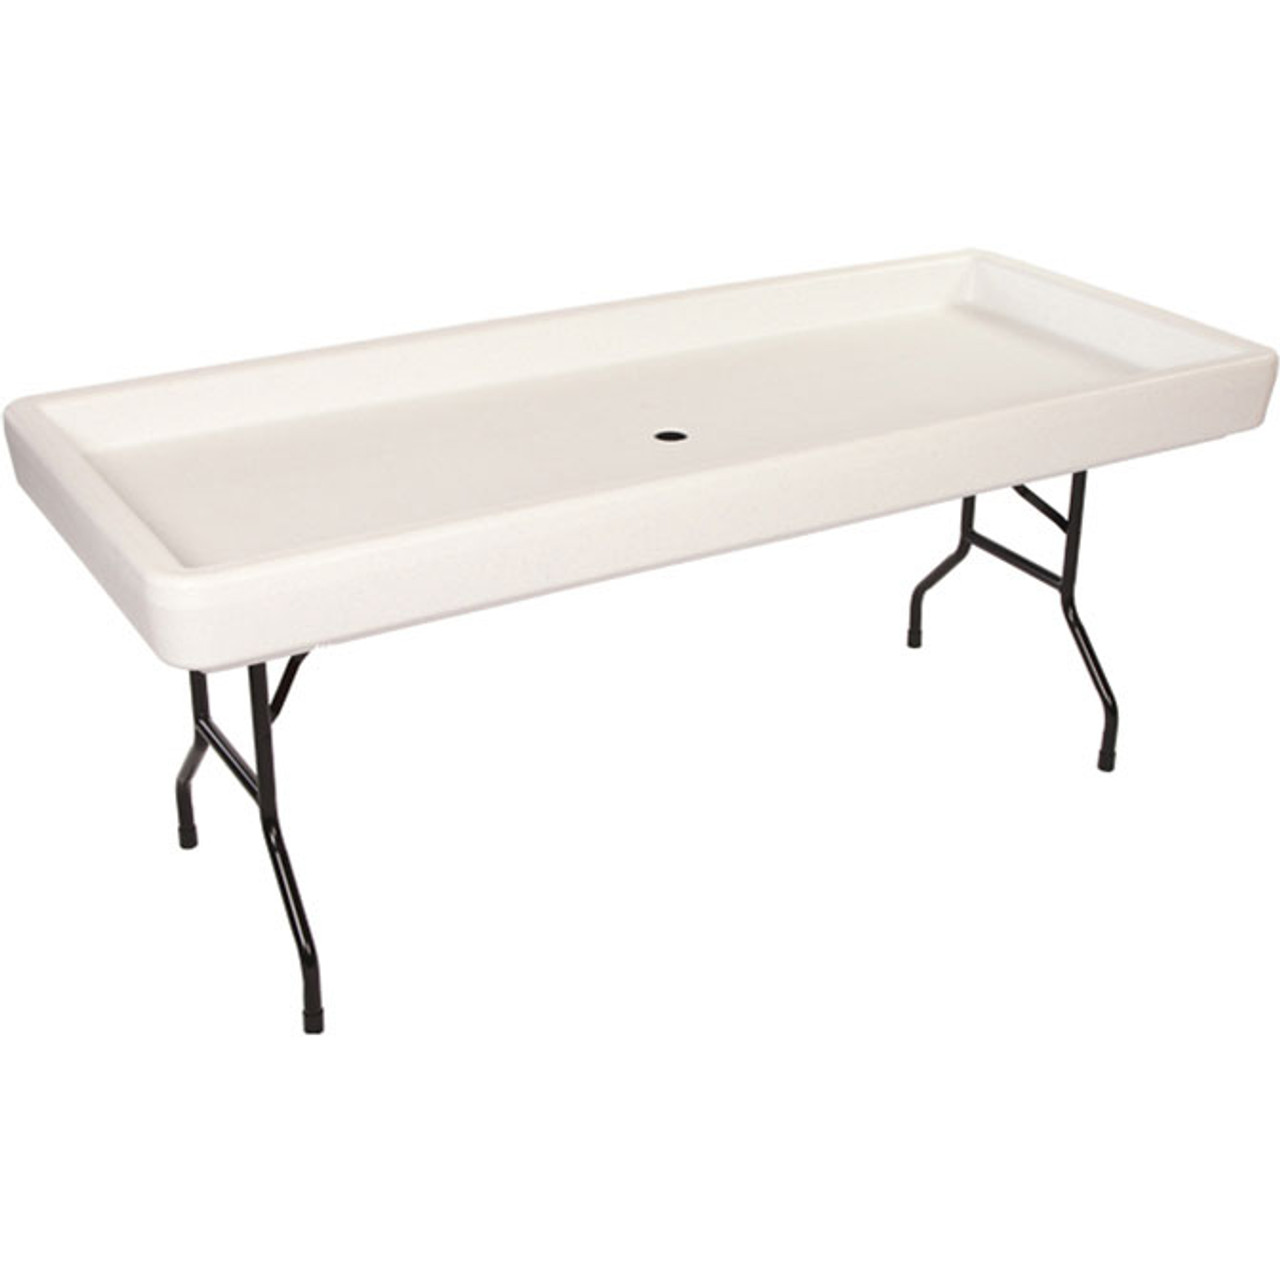 4ft Cooler Table